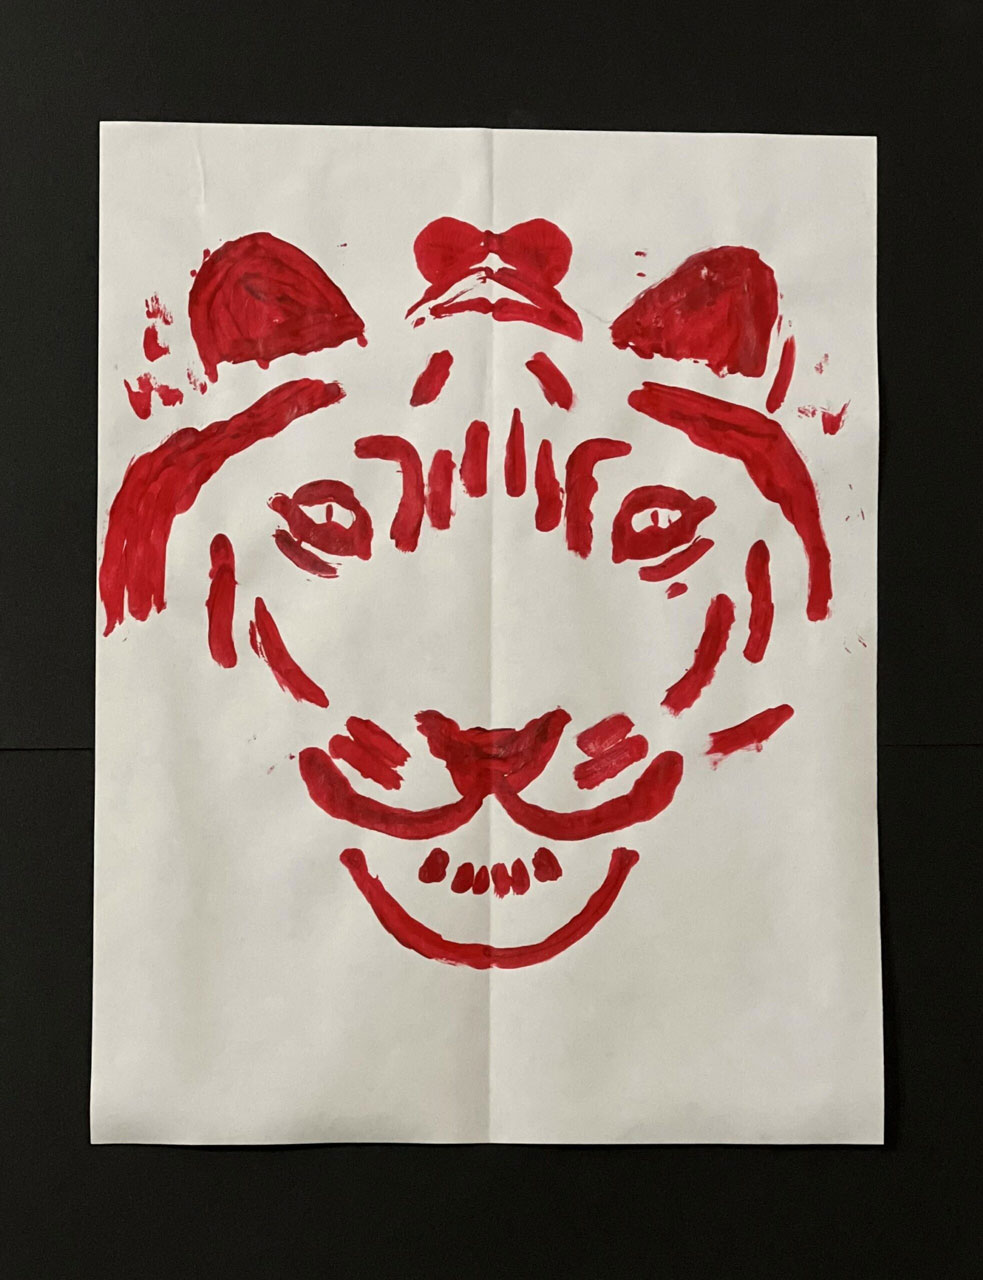 A painting of a tiger in red on a white piece of paper.